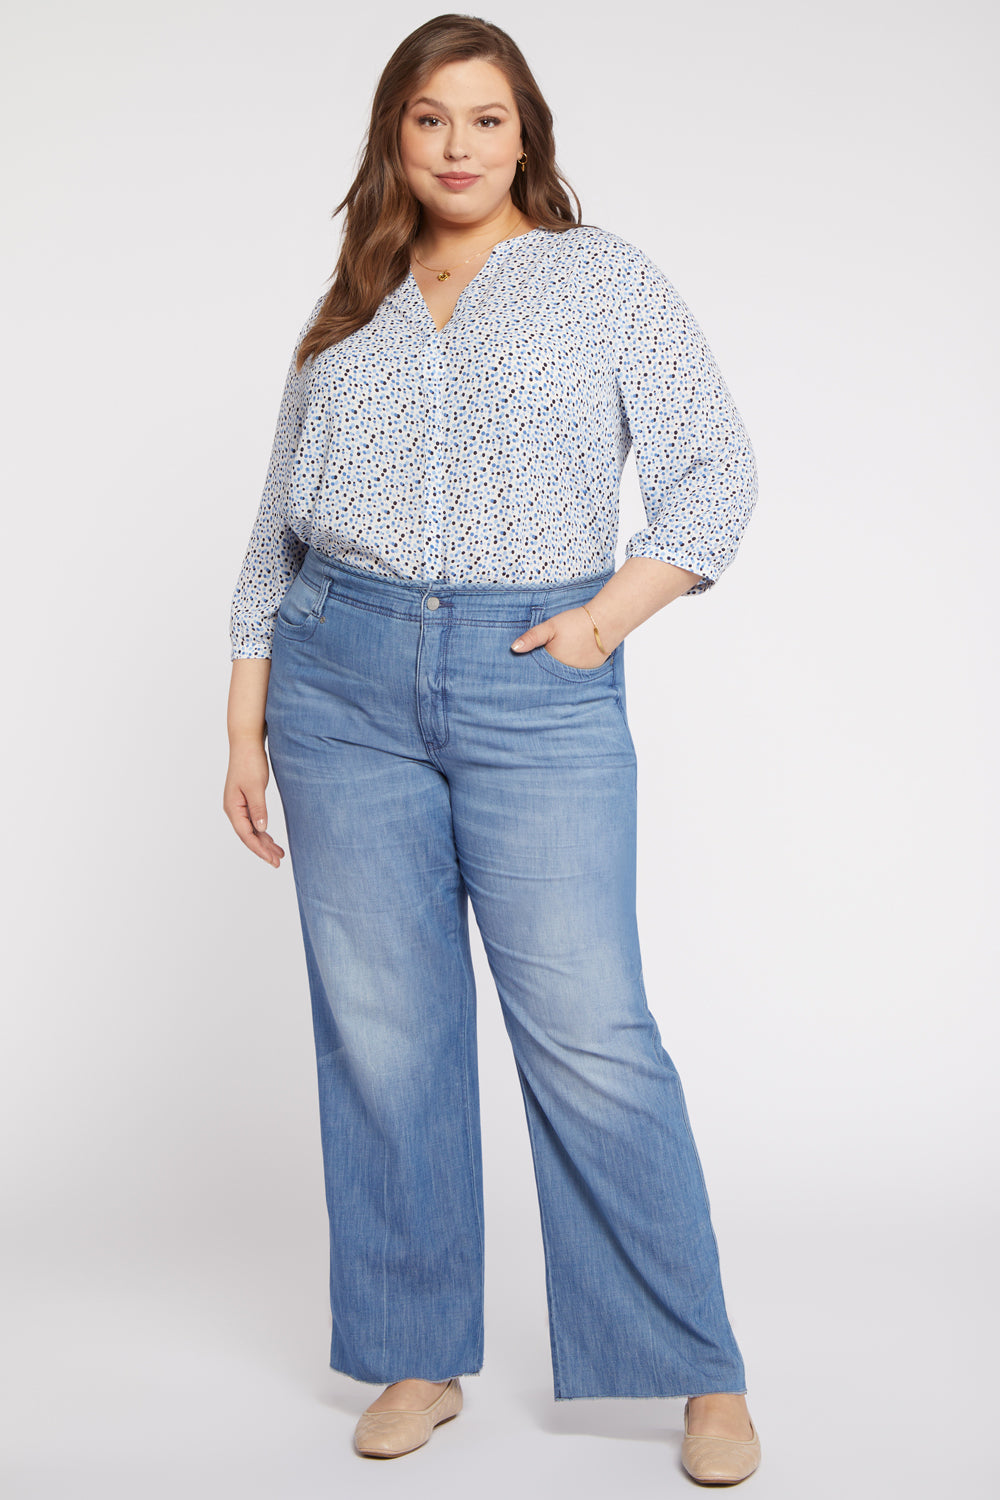 NYDJ Teresa Wide Leg Jeans In Plus Size With High Rise And Raw Hems - Everly